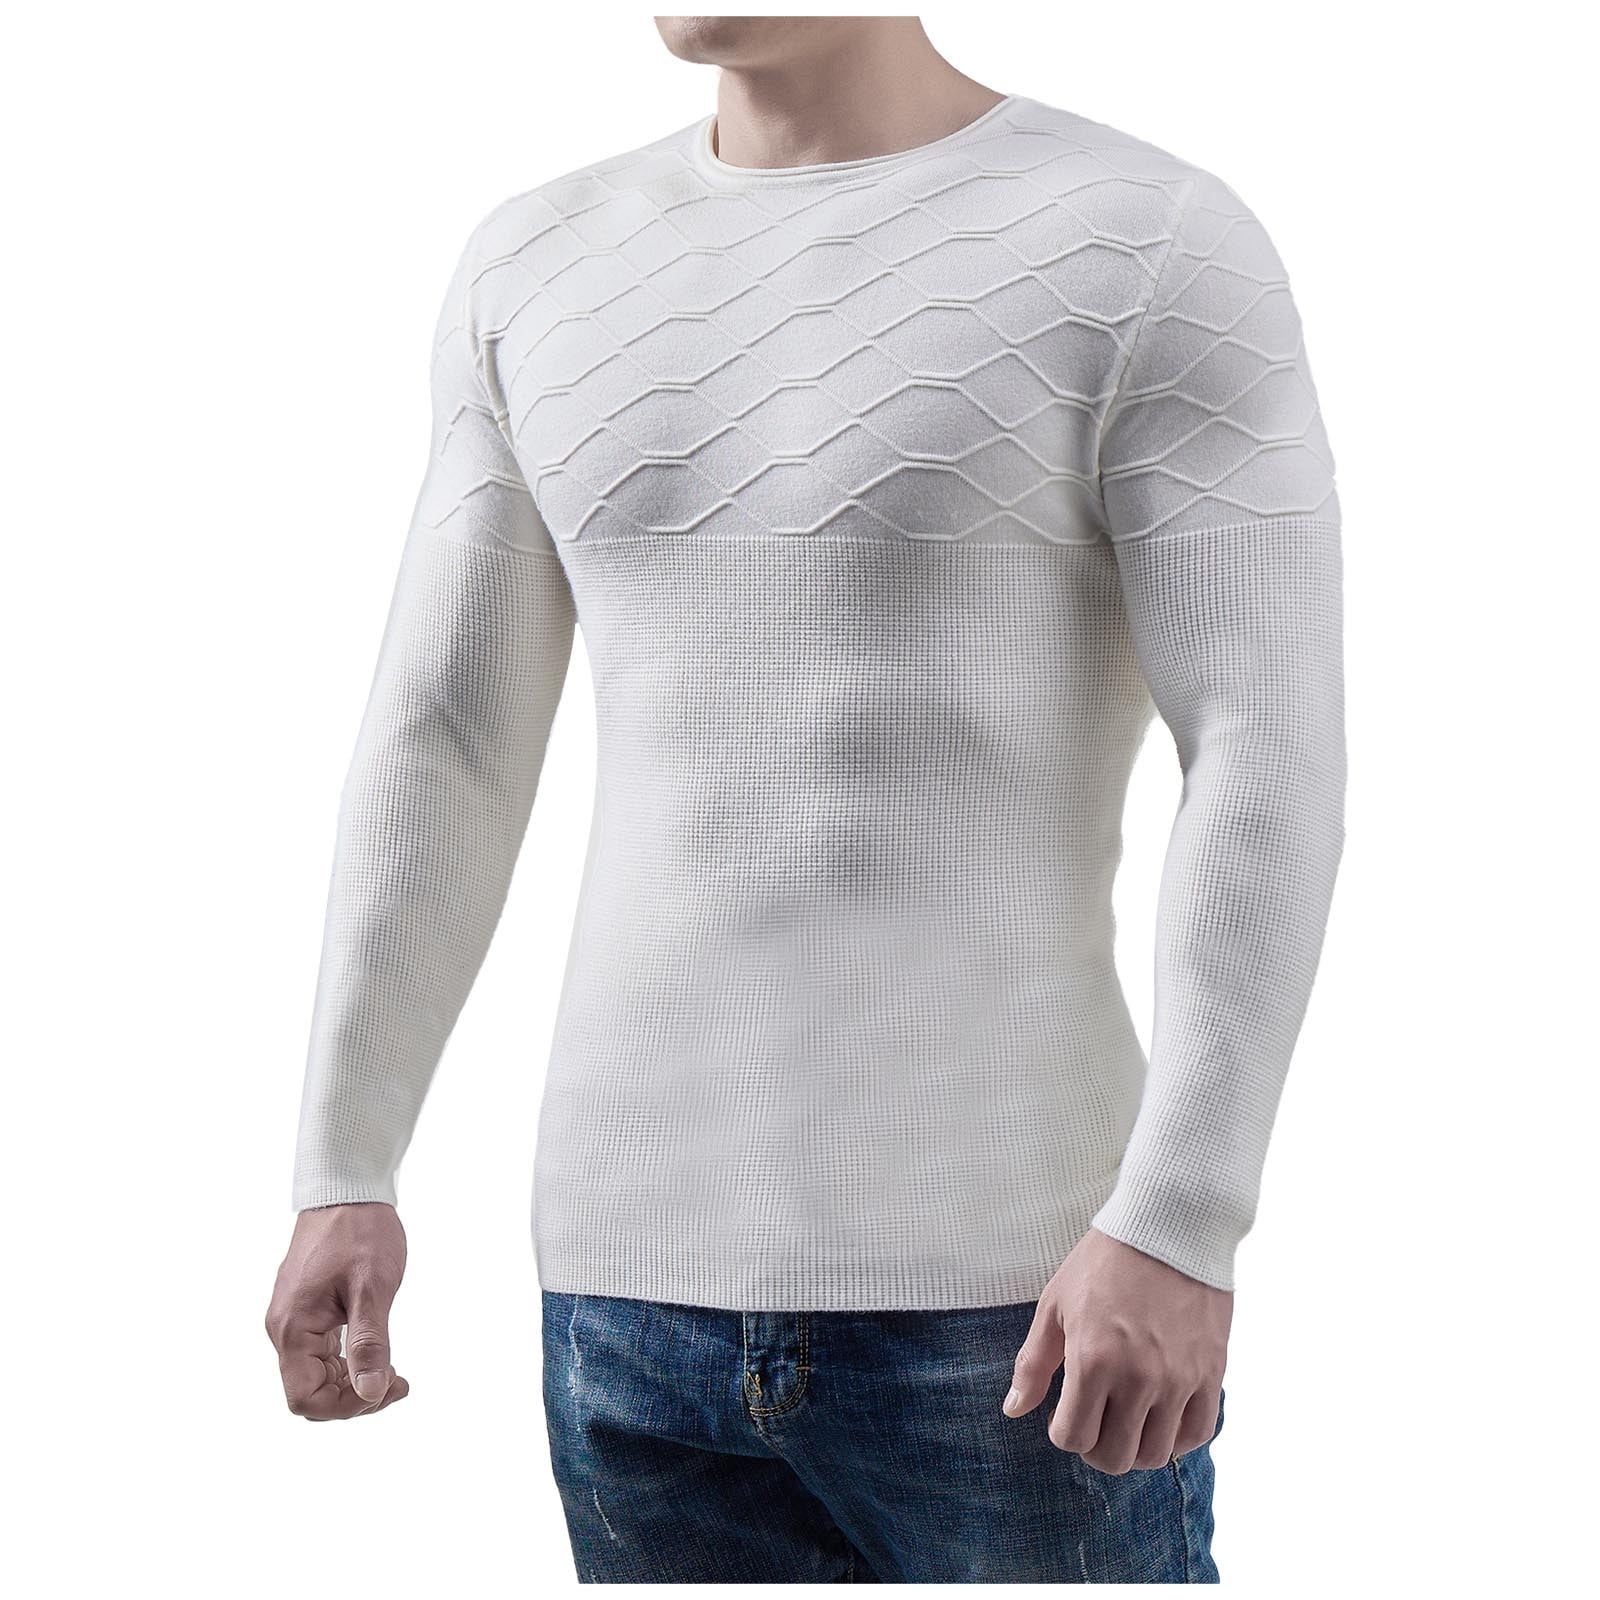 Men's Muscle Fit Compression Shirts Sweater Winter Warm Long